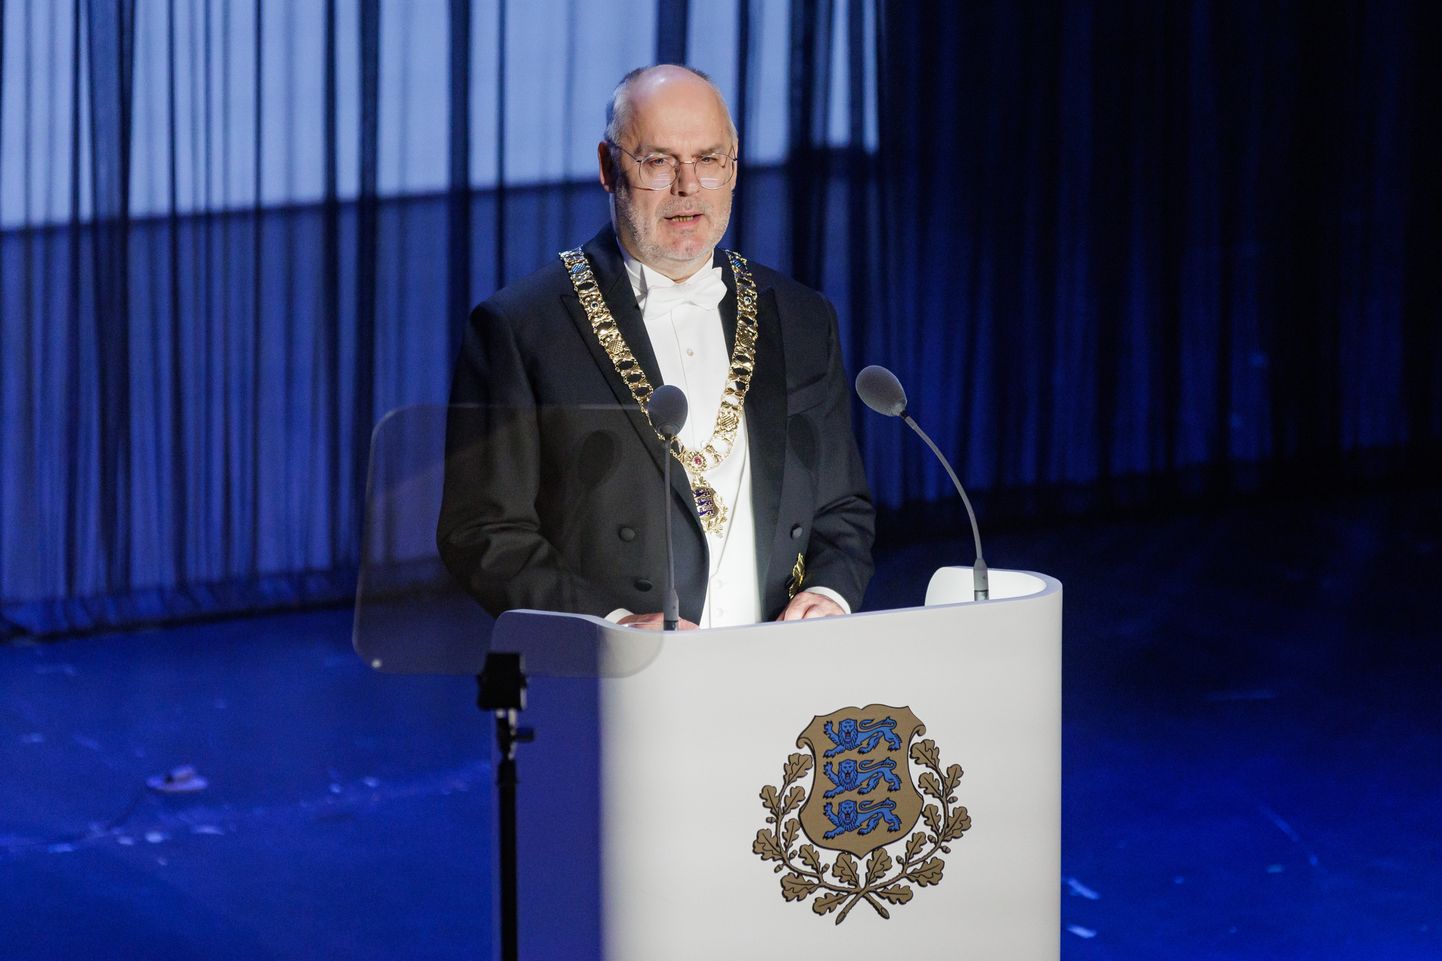 In his speech on the anniversary of the Republic of Estonia on Saturday, President Alar Karis said that supporting Ukraine is in the interests of all of Estonia.